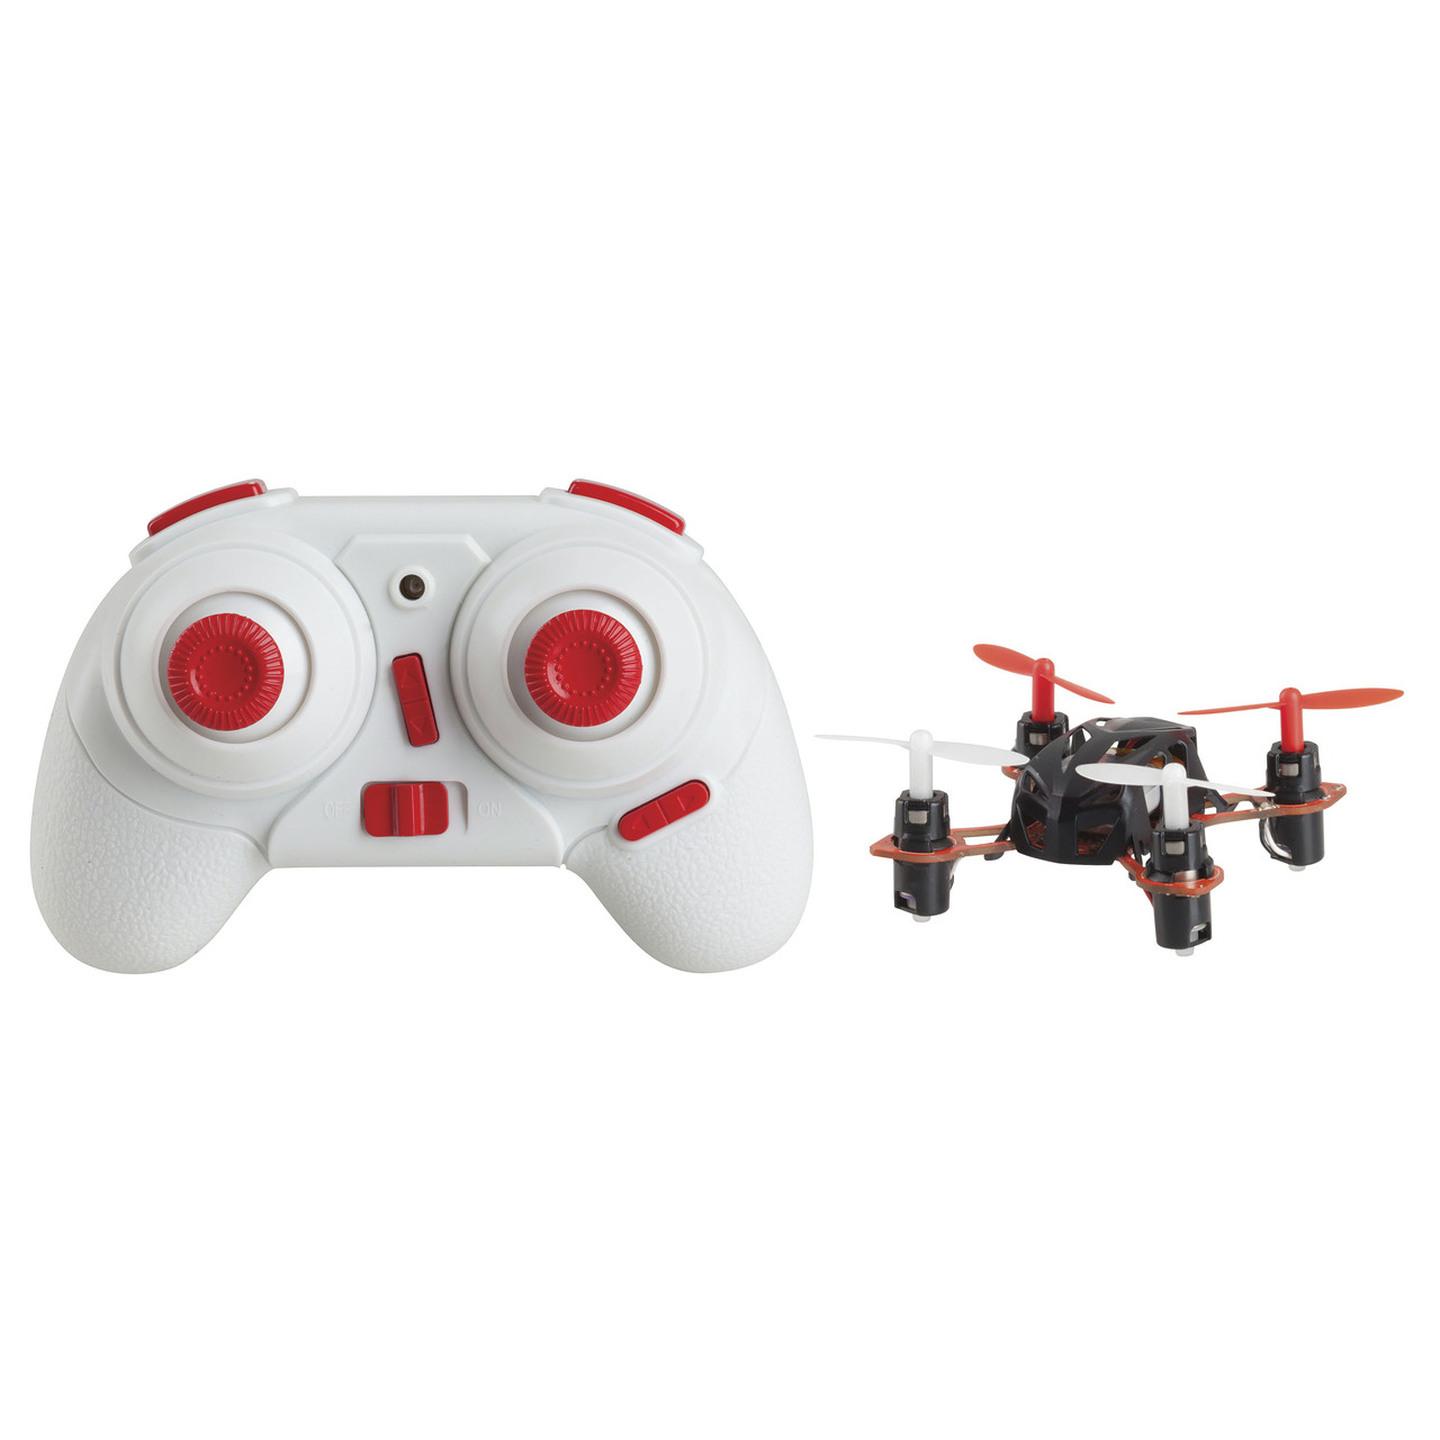 4 Channel Nano Size Quadcopter with Flip Control